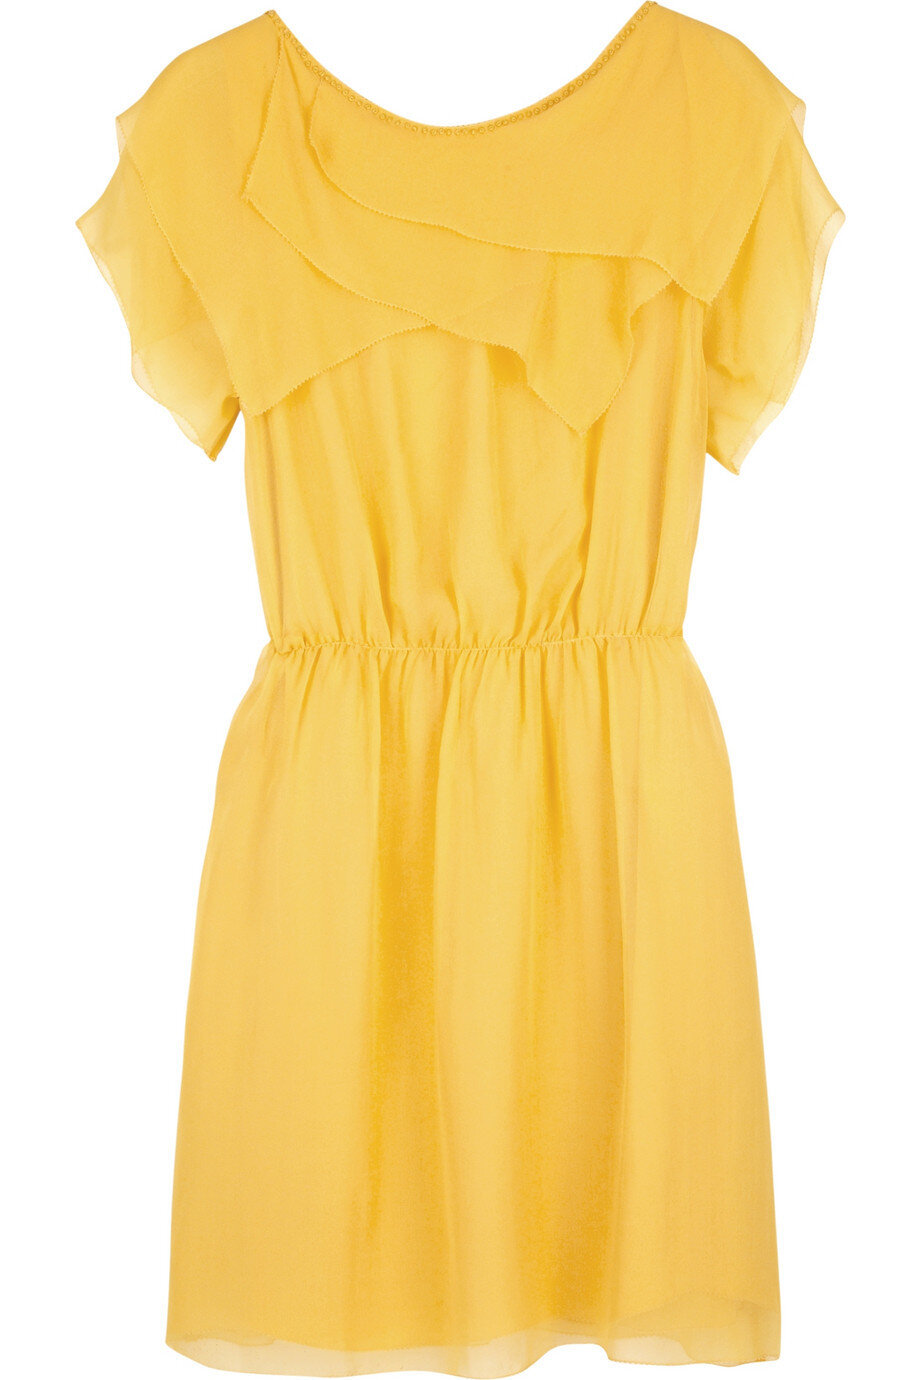 3.1 Phillip Lim French Knot Embellished Mini Dress in Yellow.jpg